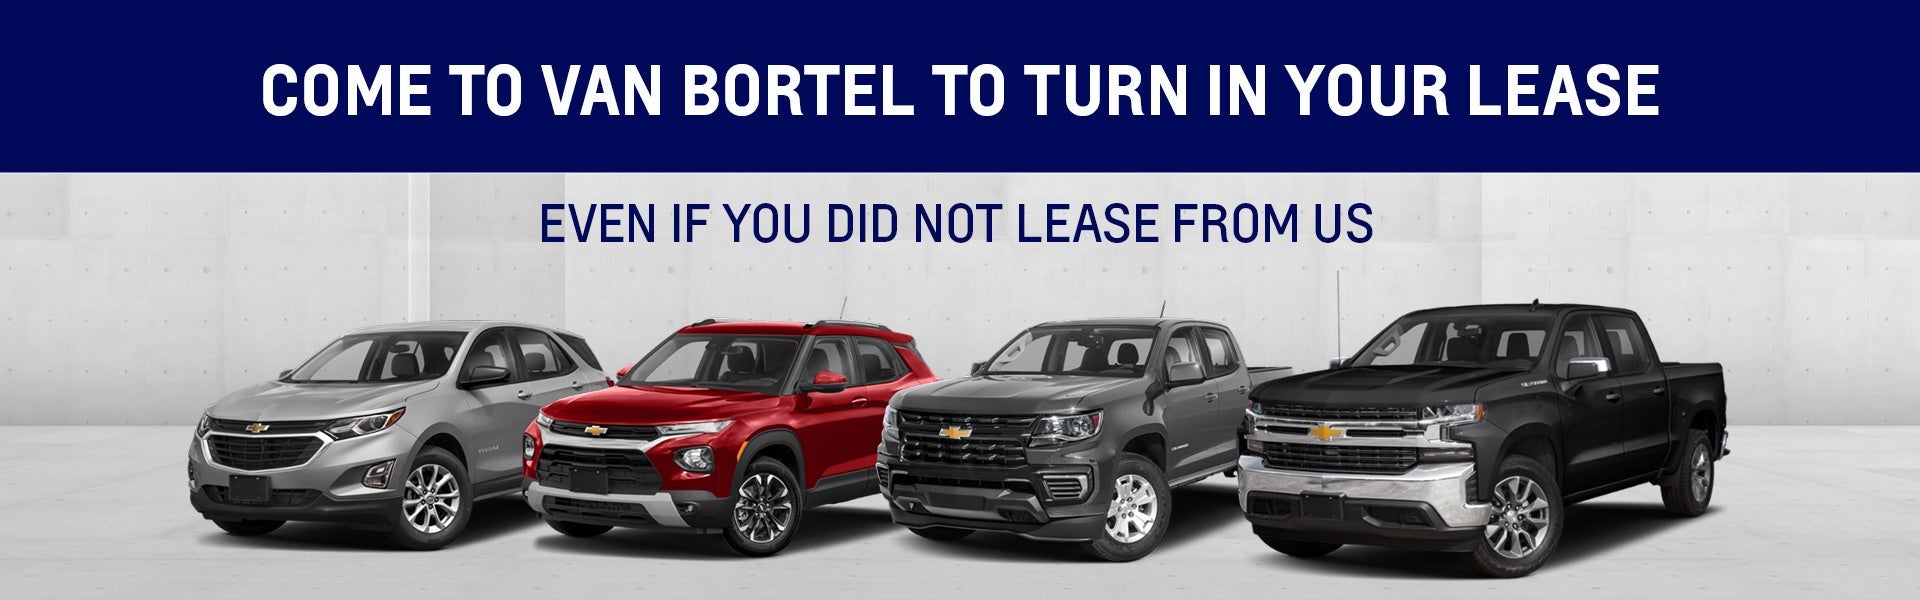 Come to Van Bortel to Turn in your lease